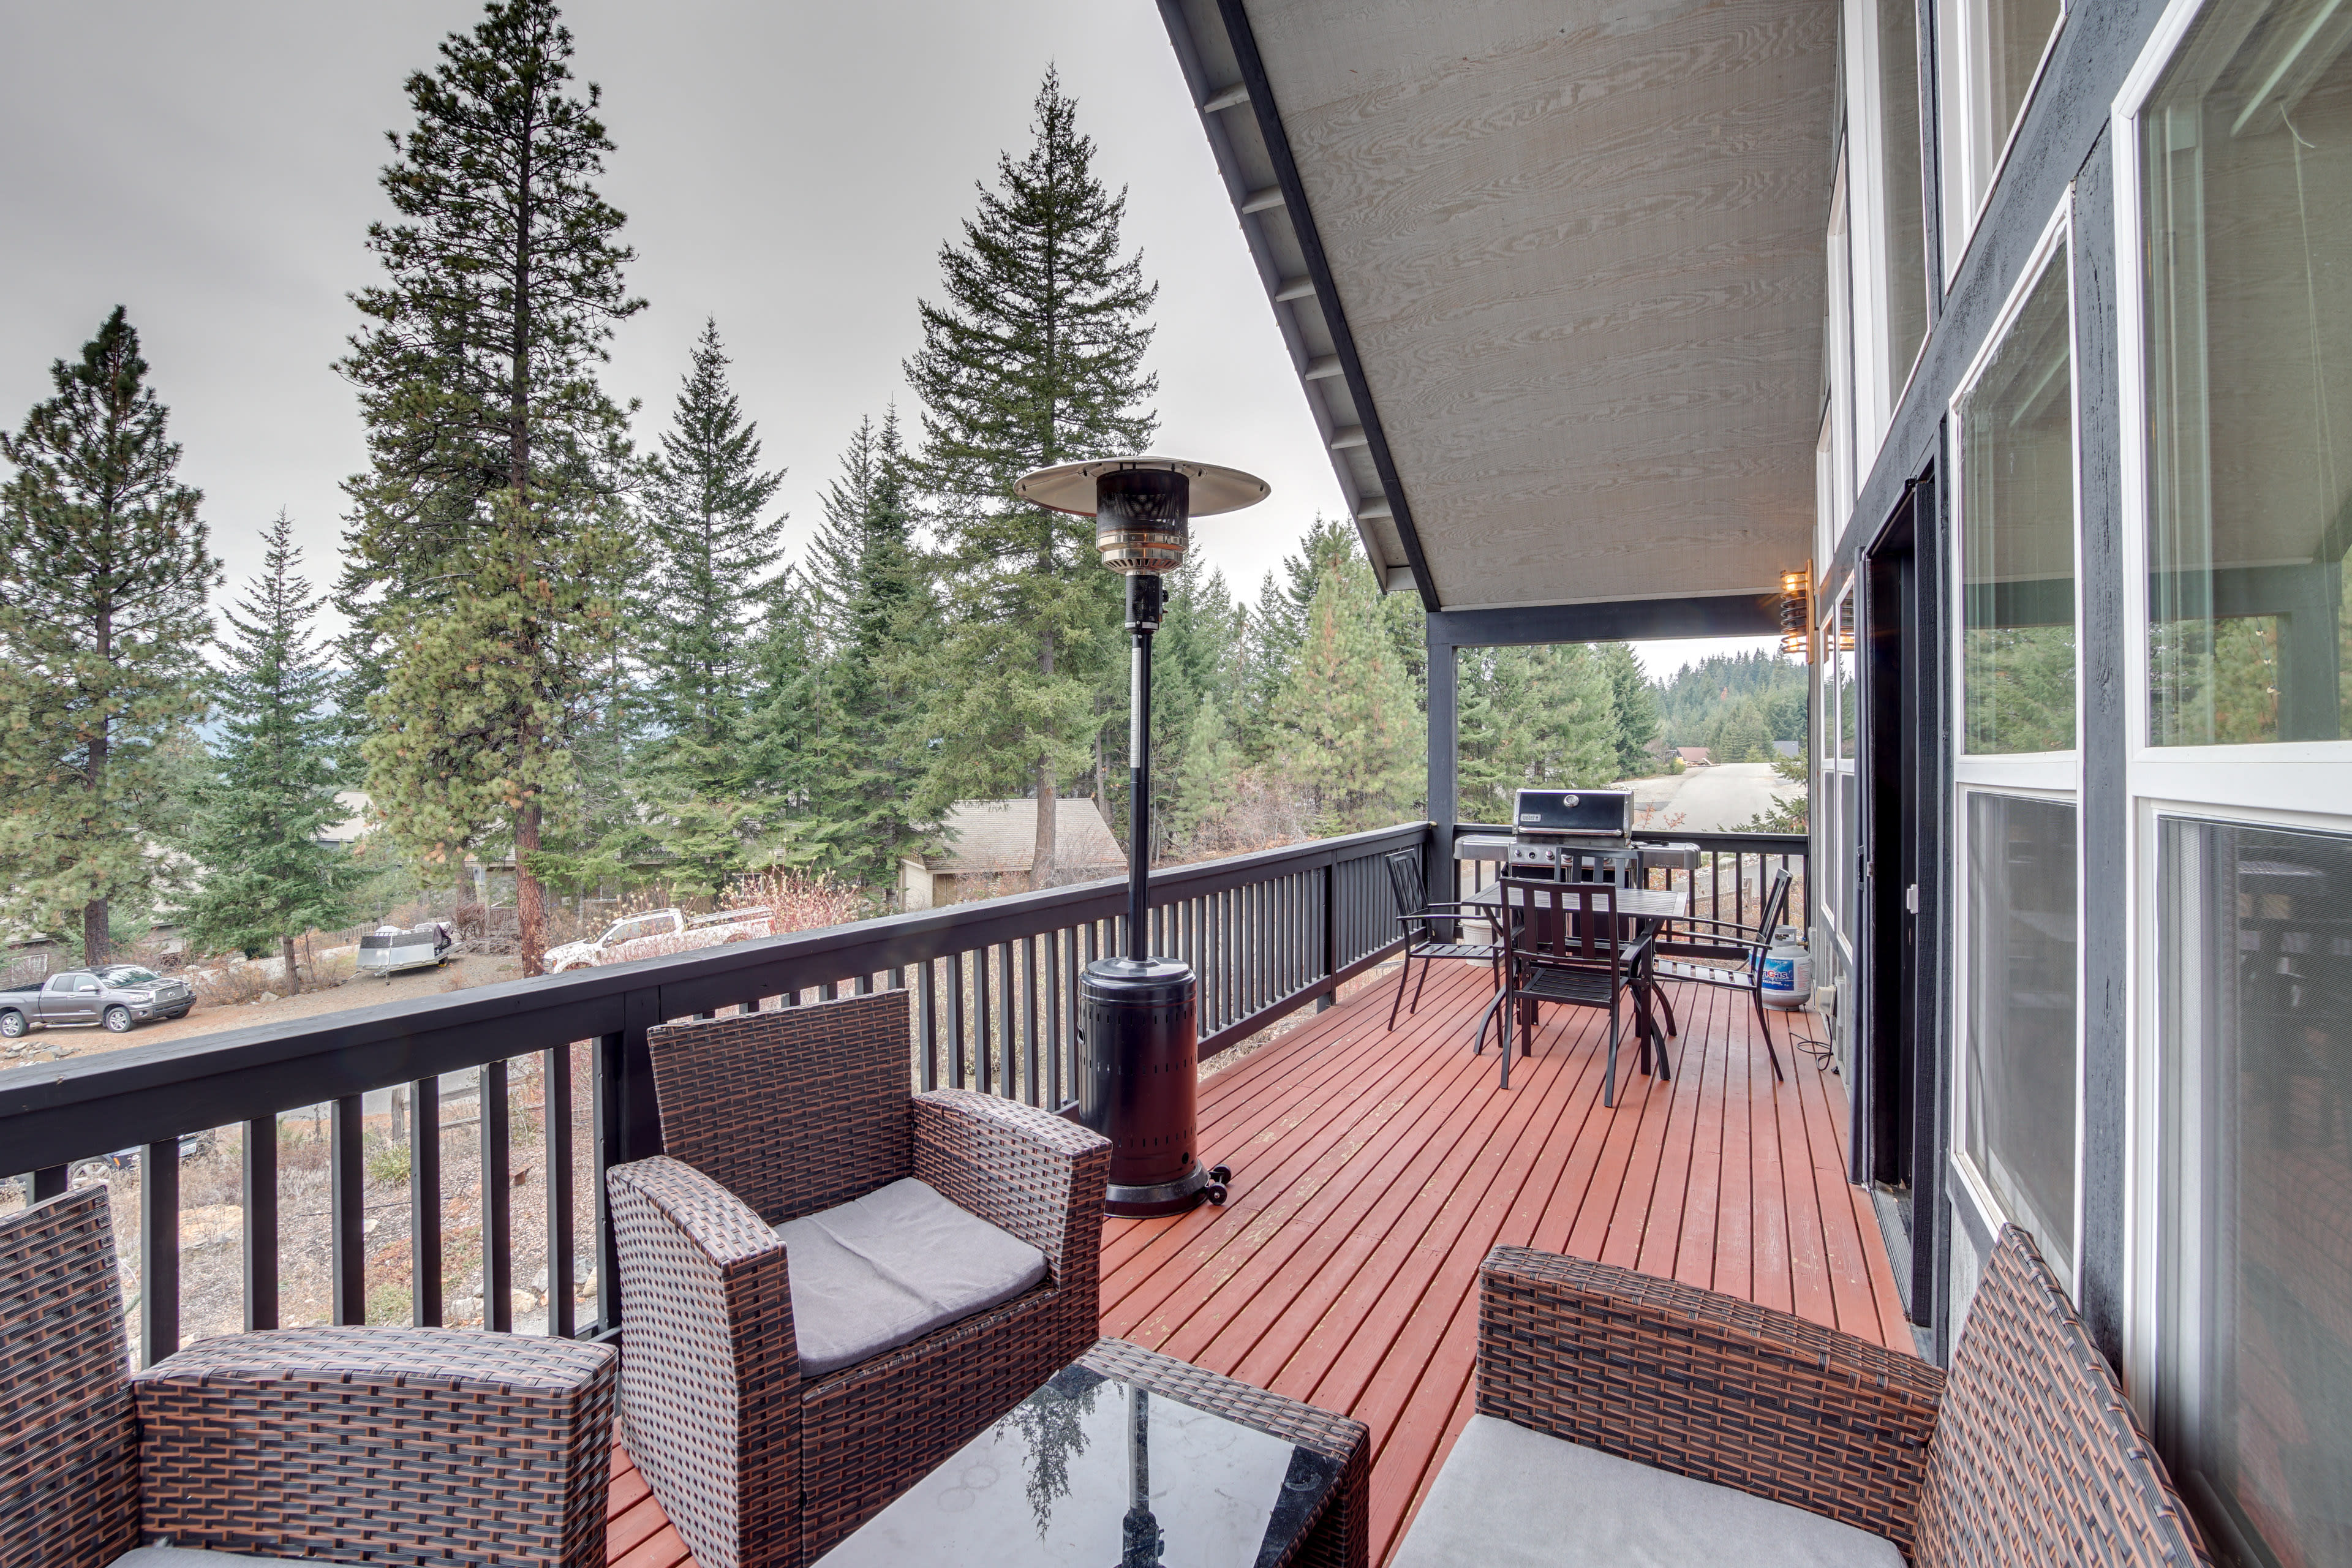 Deck | Outdoor Dining Area | Gas Grill | Patio Heater | Mountain Views